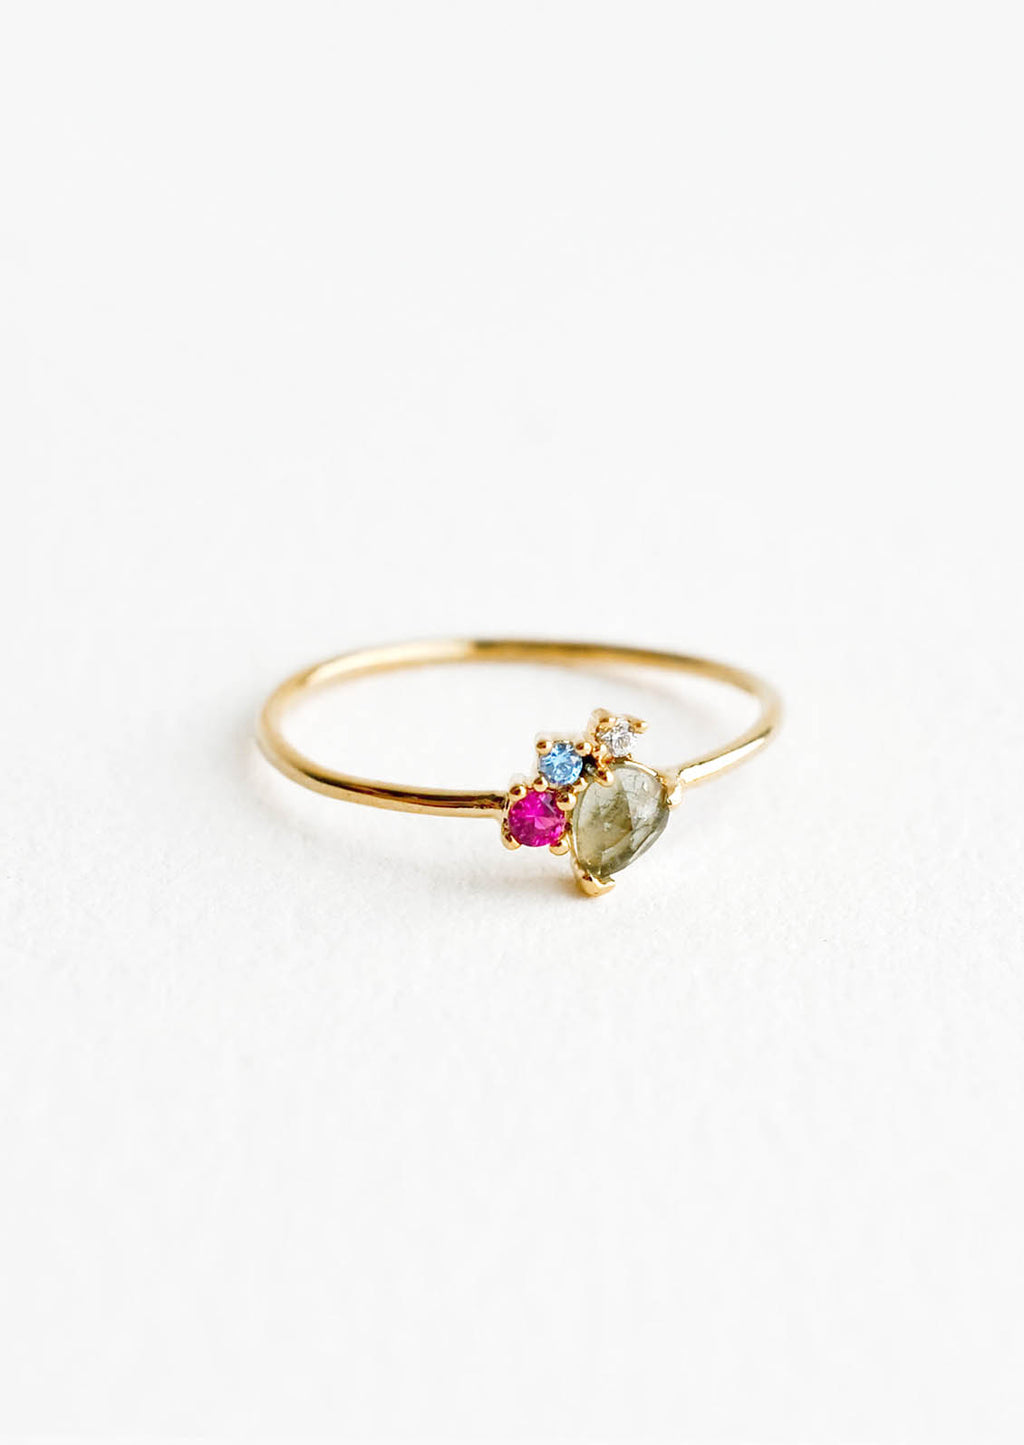 Grey Multi / Size 6: Gold ring featuring slim band with two gemstones and two crystals in pink, blue and grey hues, prong set in a cluster.